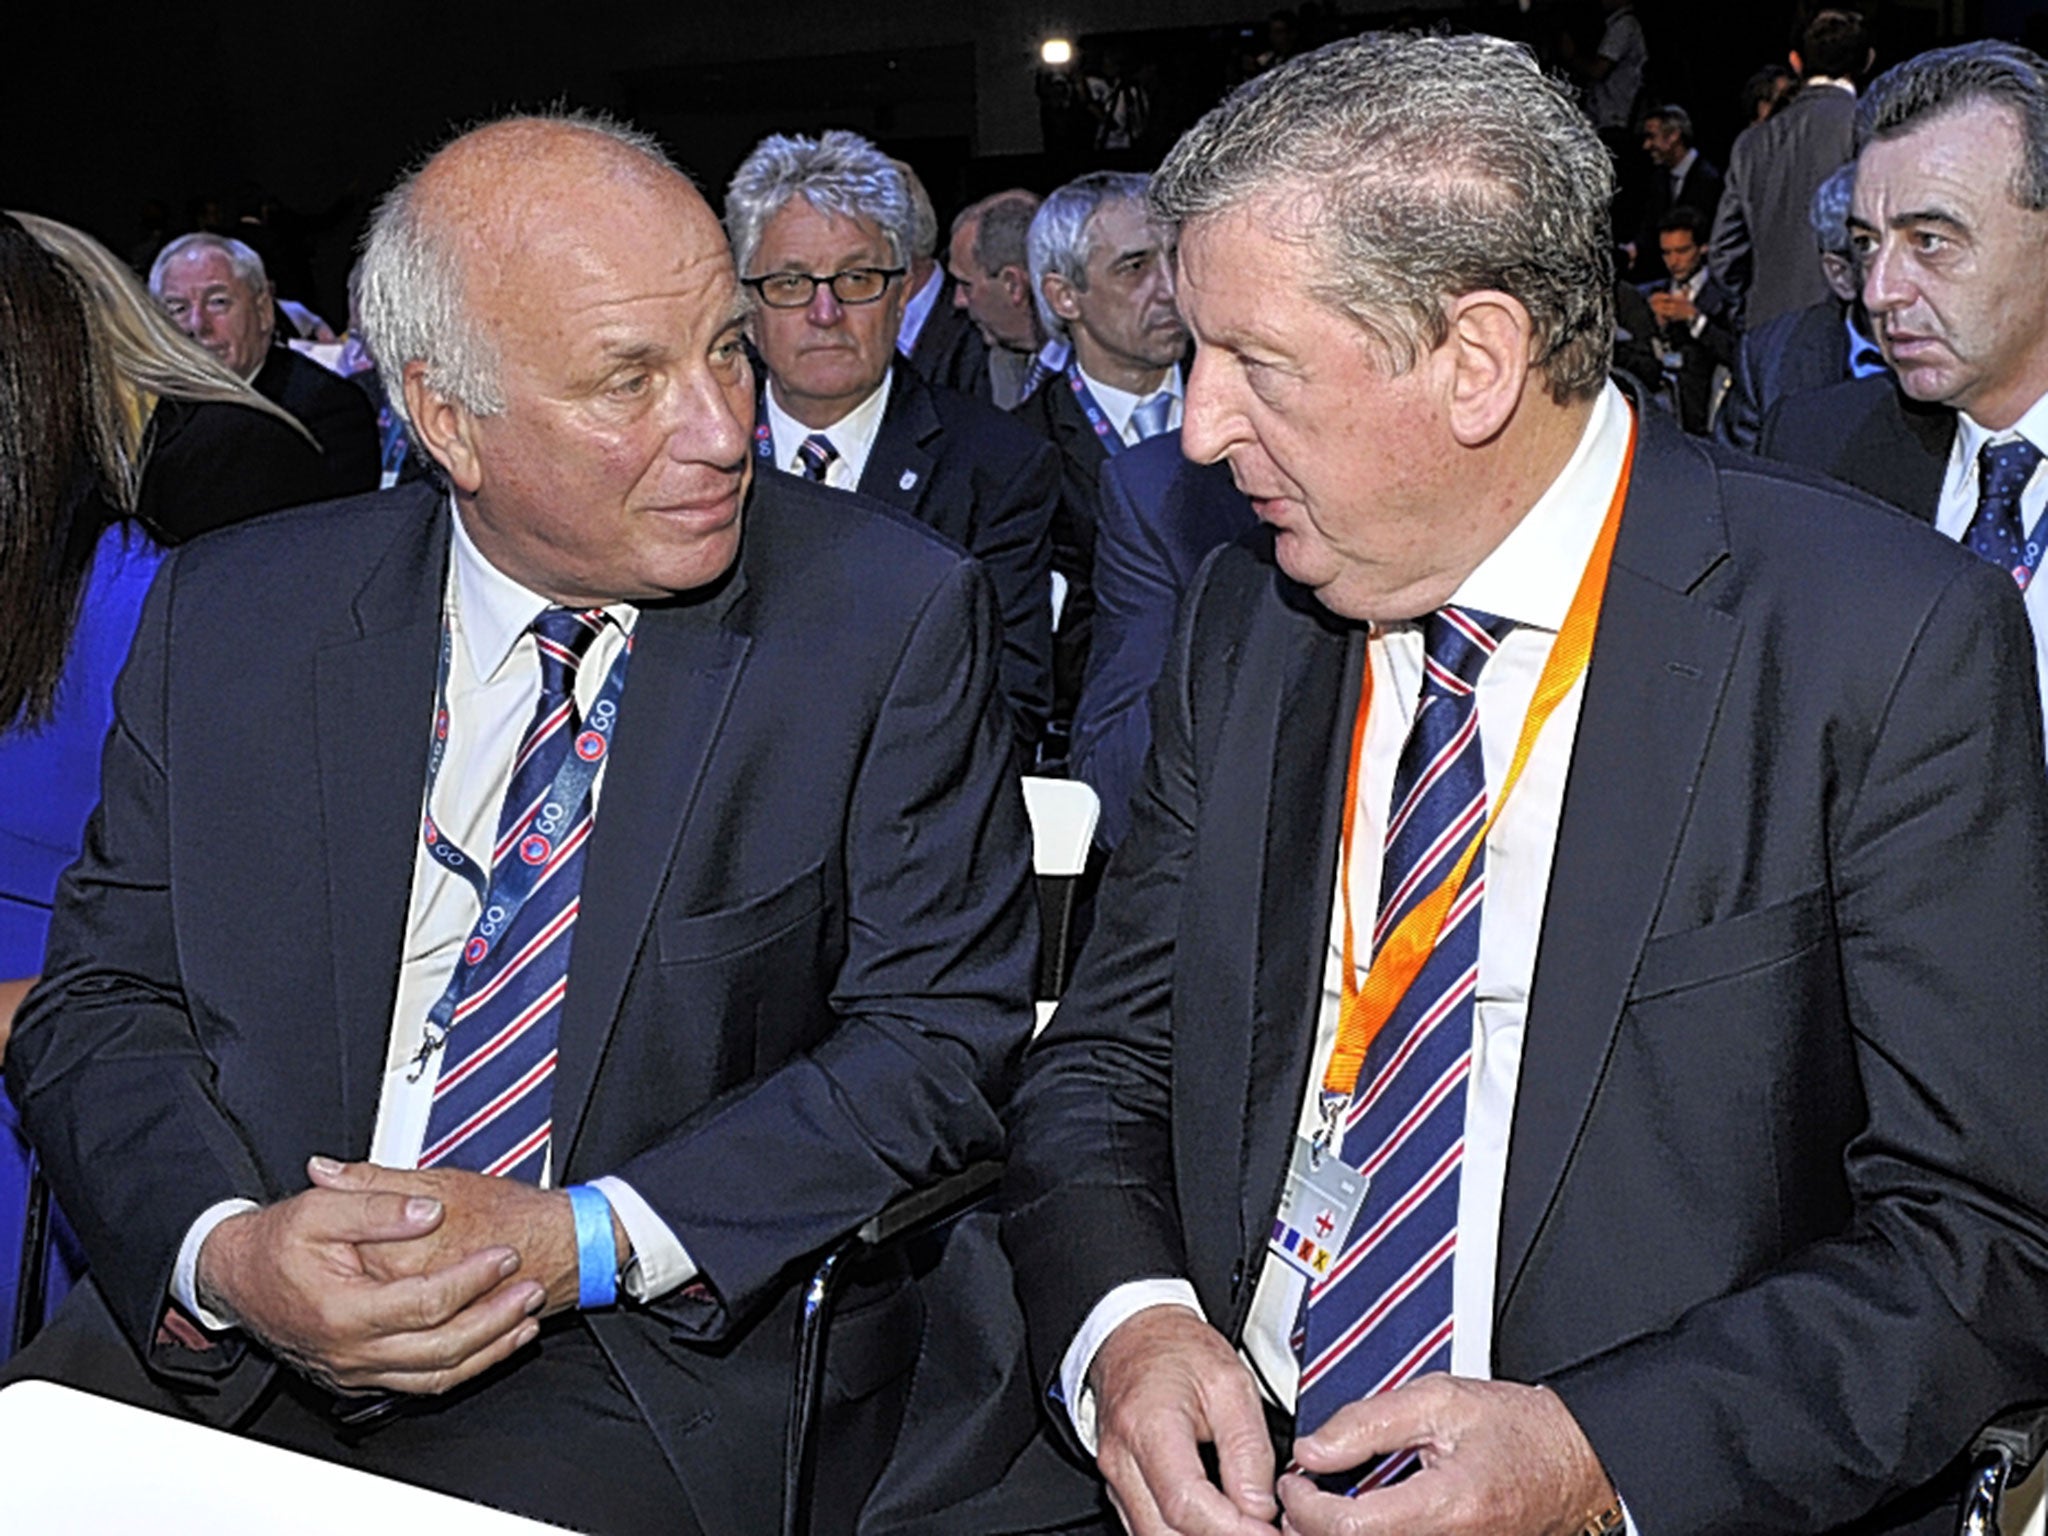 Talking heads: Greg Dyke (left) and Roy Hodgson at the the Euro 2020 Host Cities ceremony